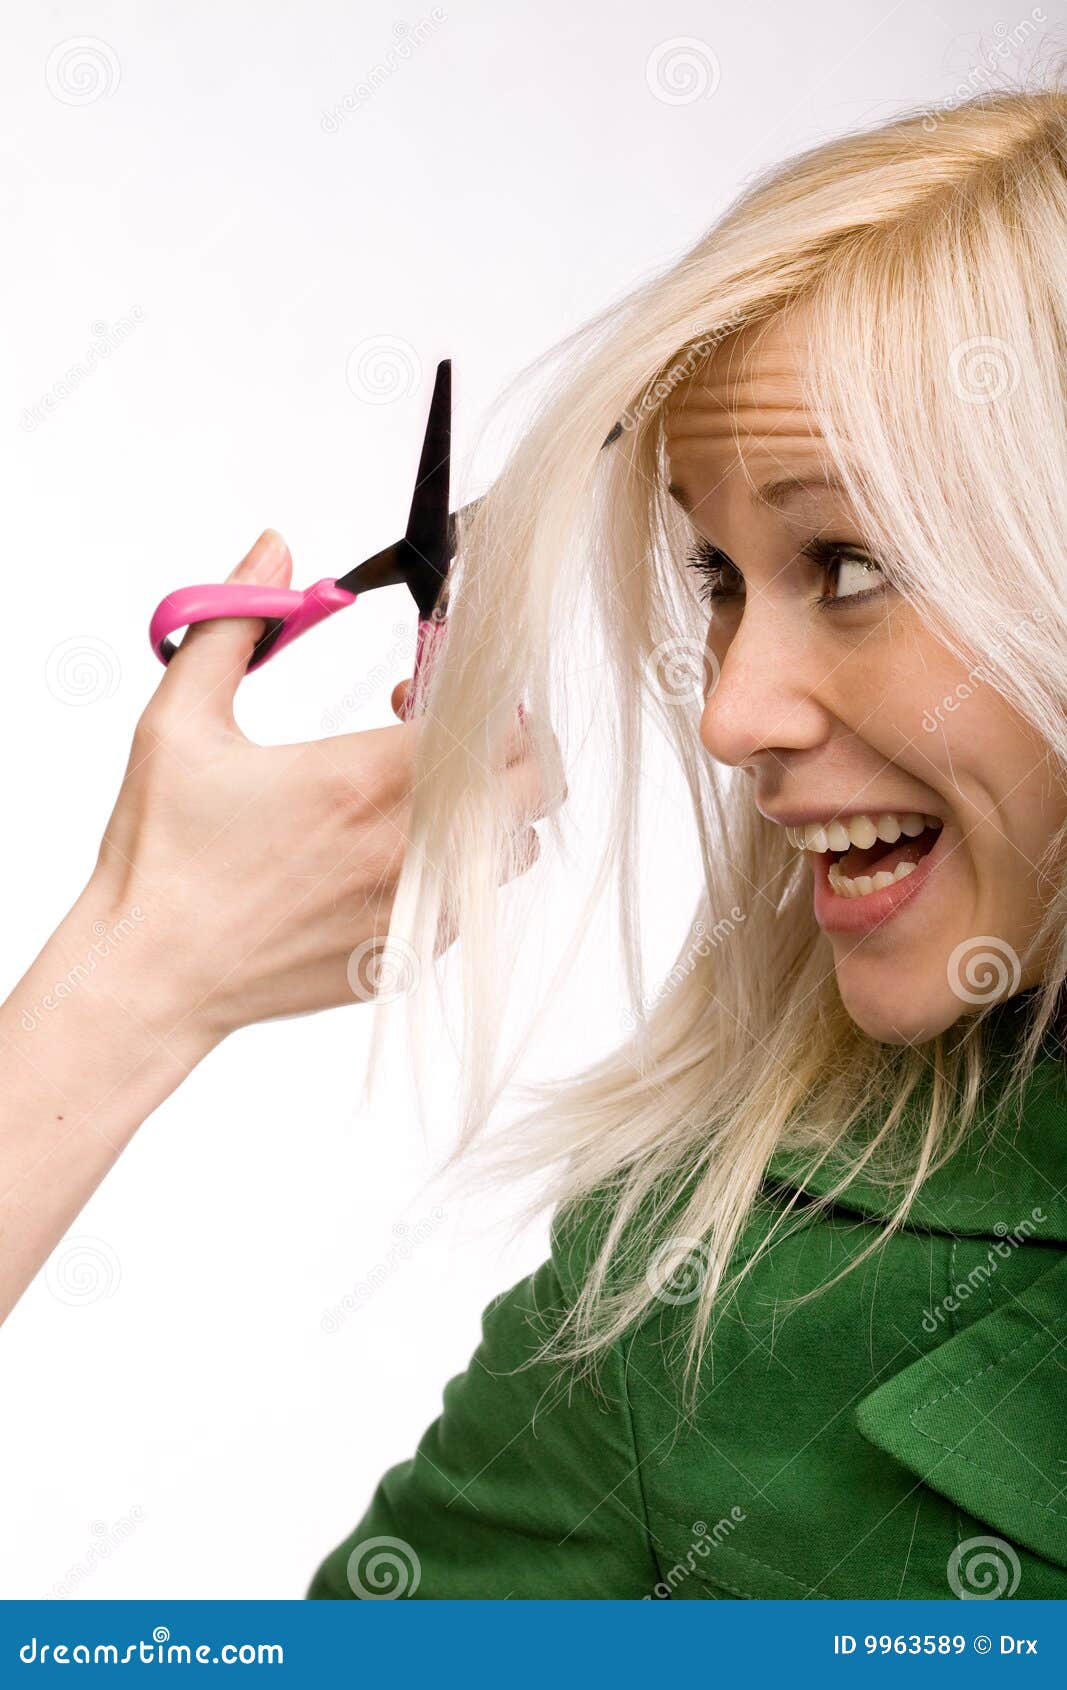 Hair Stress Royalty Free Stock Images - Image: 9963589